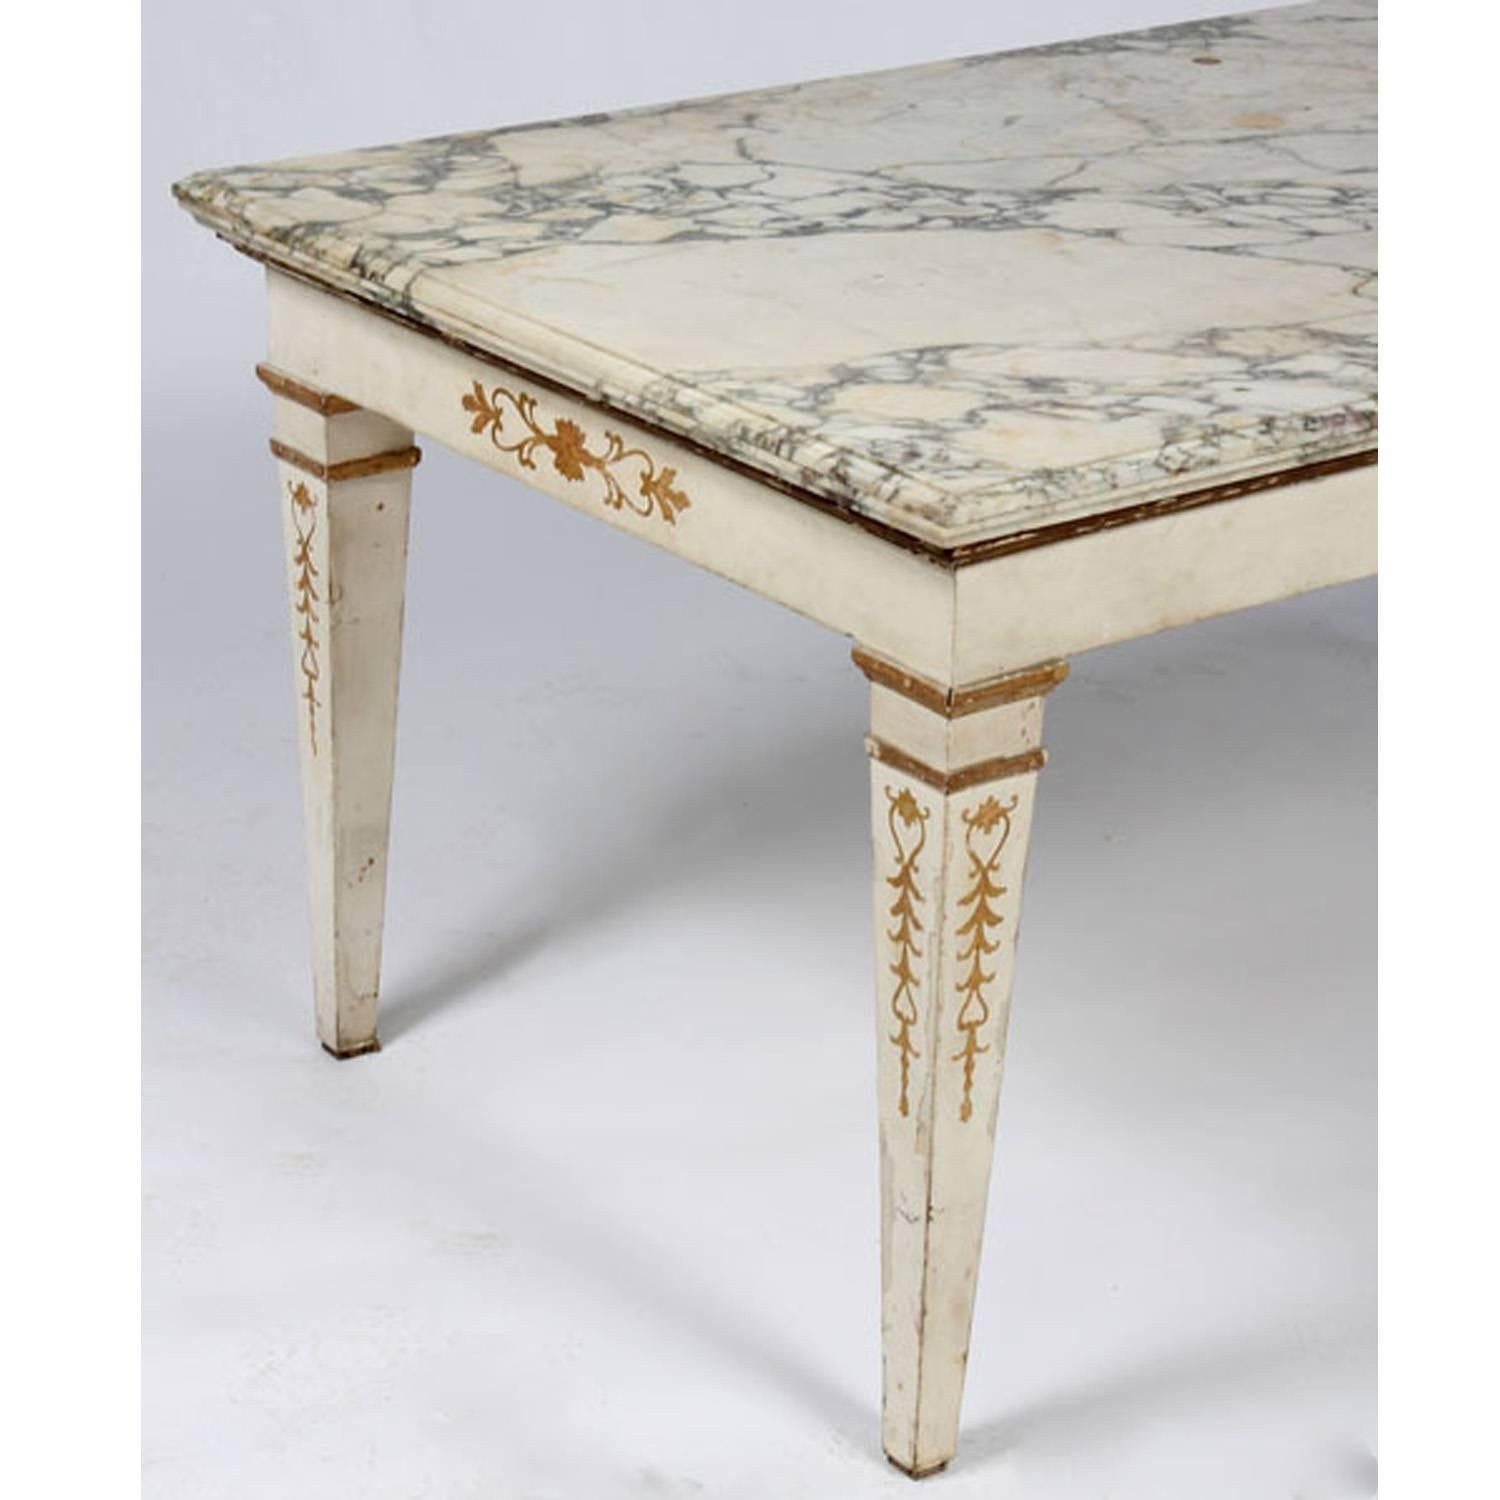 Neoclassical Console Table Painted White and Gold Details In Fair Condition For Sale In Newburgh, NY